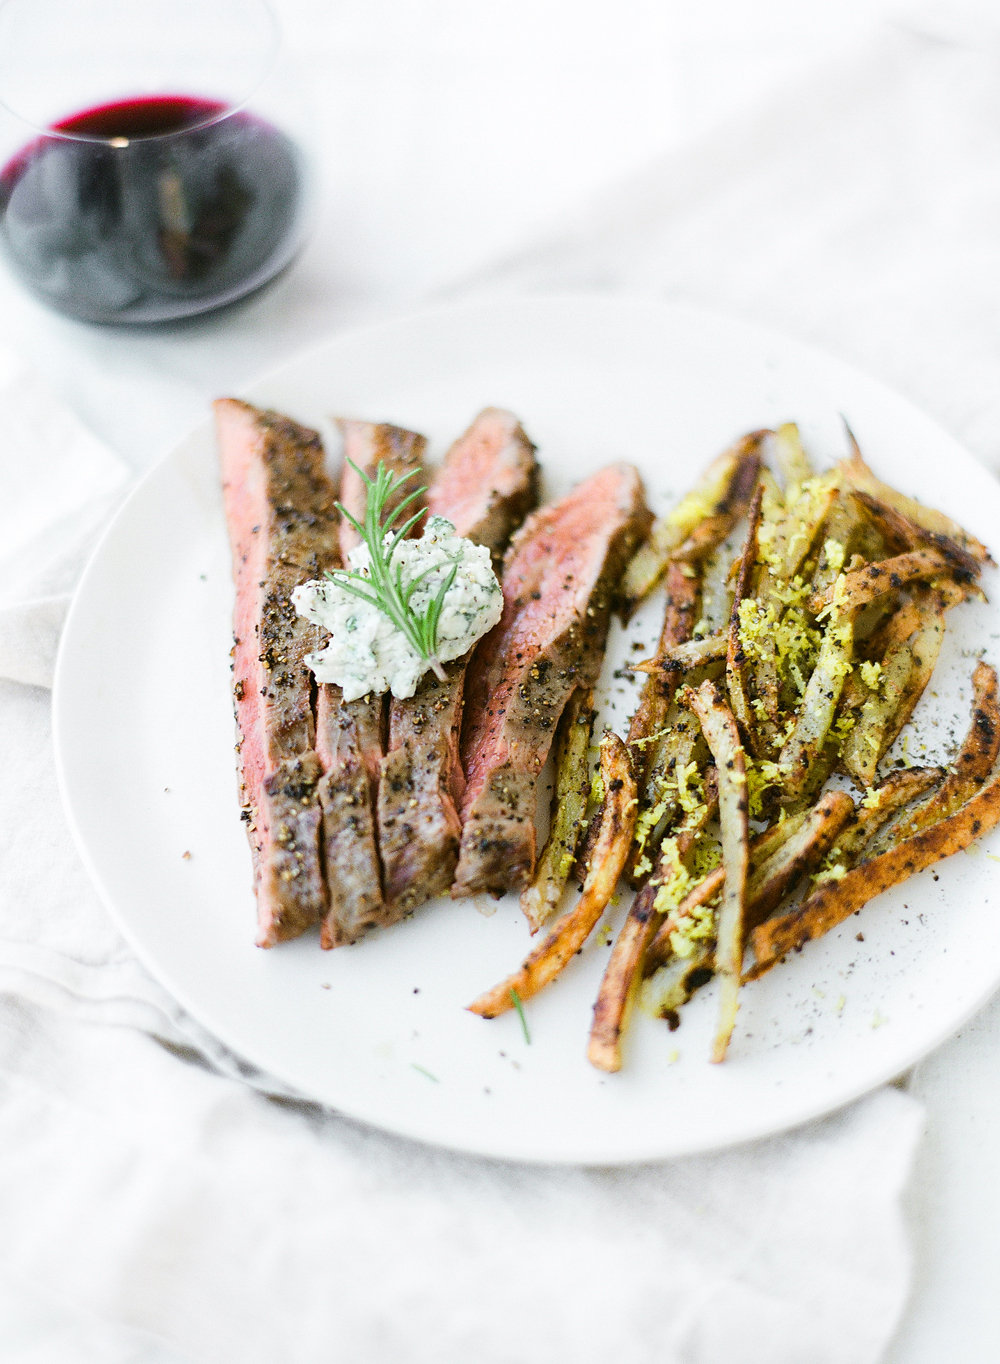 We break down how to perfectly prepare a delicious skirt steak and how to masterfully plate it with our blue cheese butter and garnish on top. This divine pairing brings out the rich flavors of the steak by letting the bite of the blue cheese butter melt in and mélange the flavors perfectly! #recipe